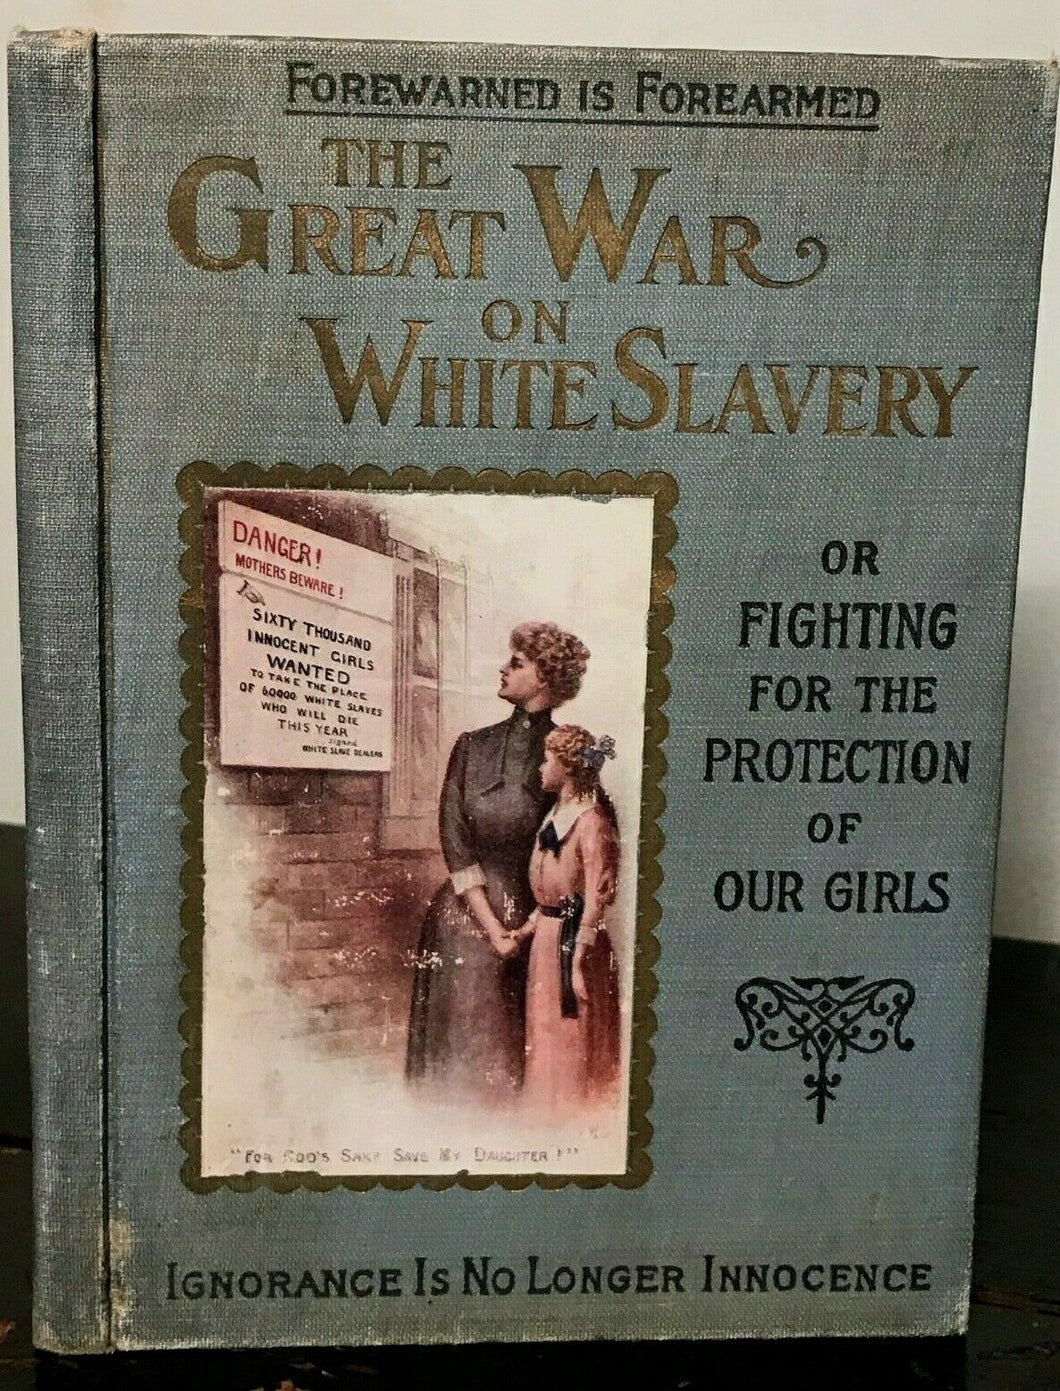 GREAT WAR ON WHITE SLAVERY - Roe, 1st Ed 1911 - PROSTITUTION SEX TRADE TRAFFIC